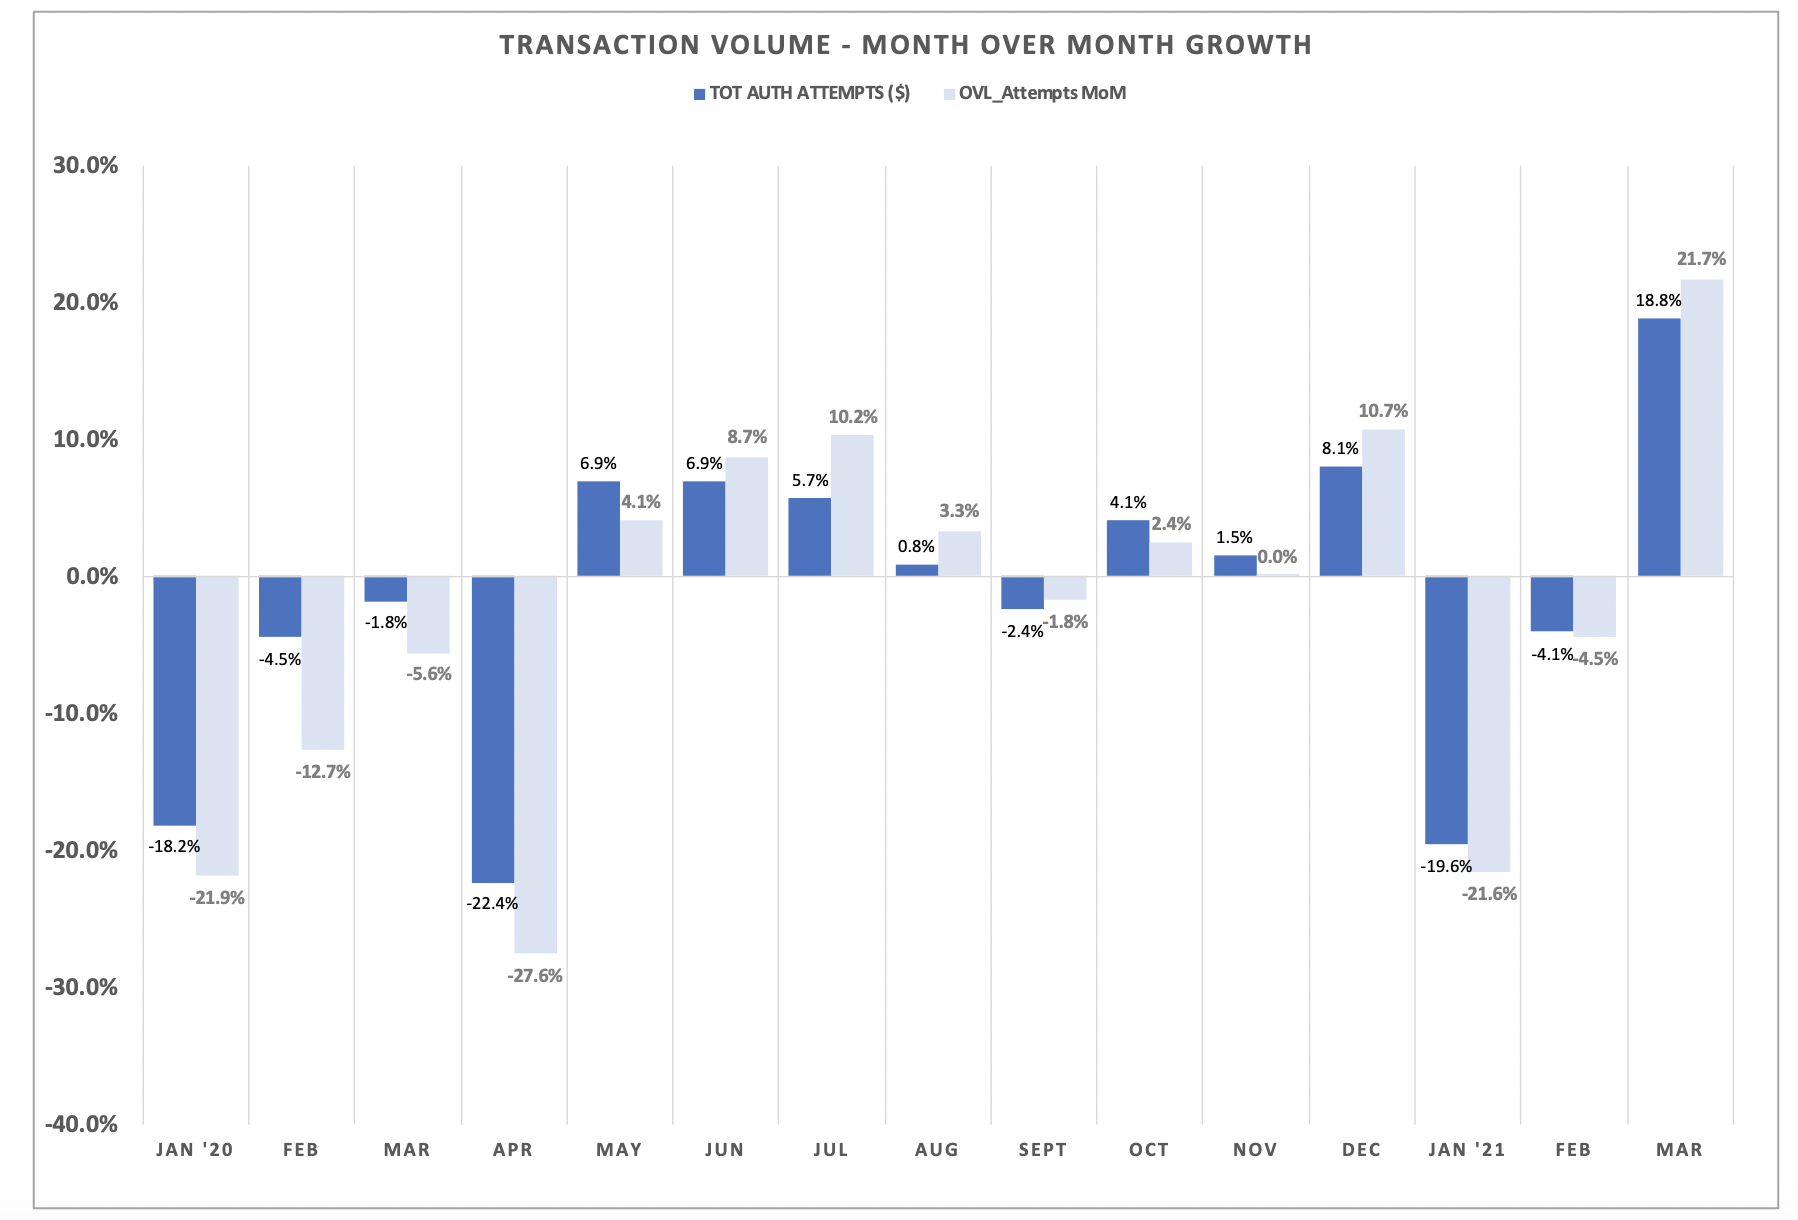 Transaction Volume - Month Over Month Growth